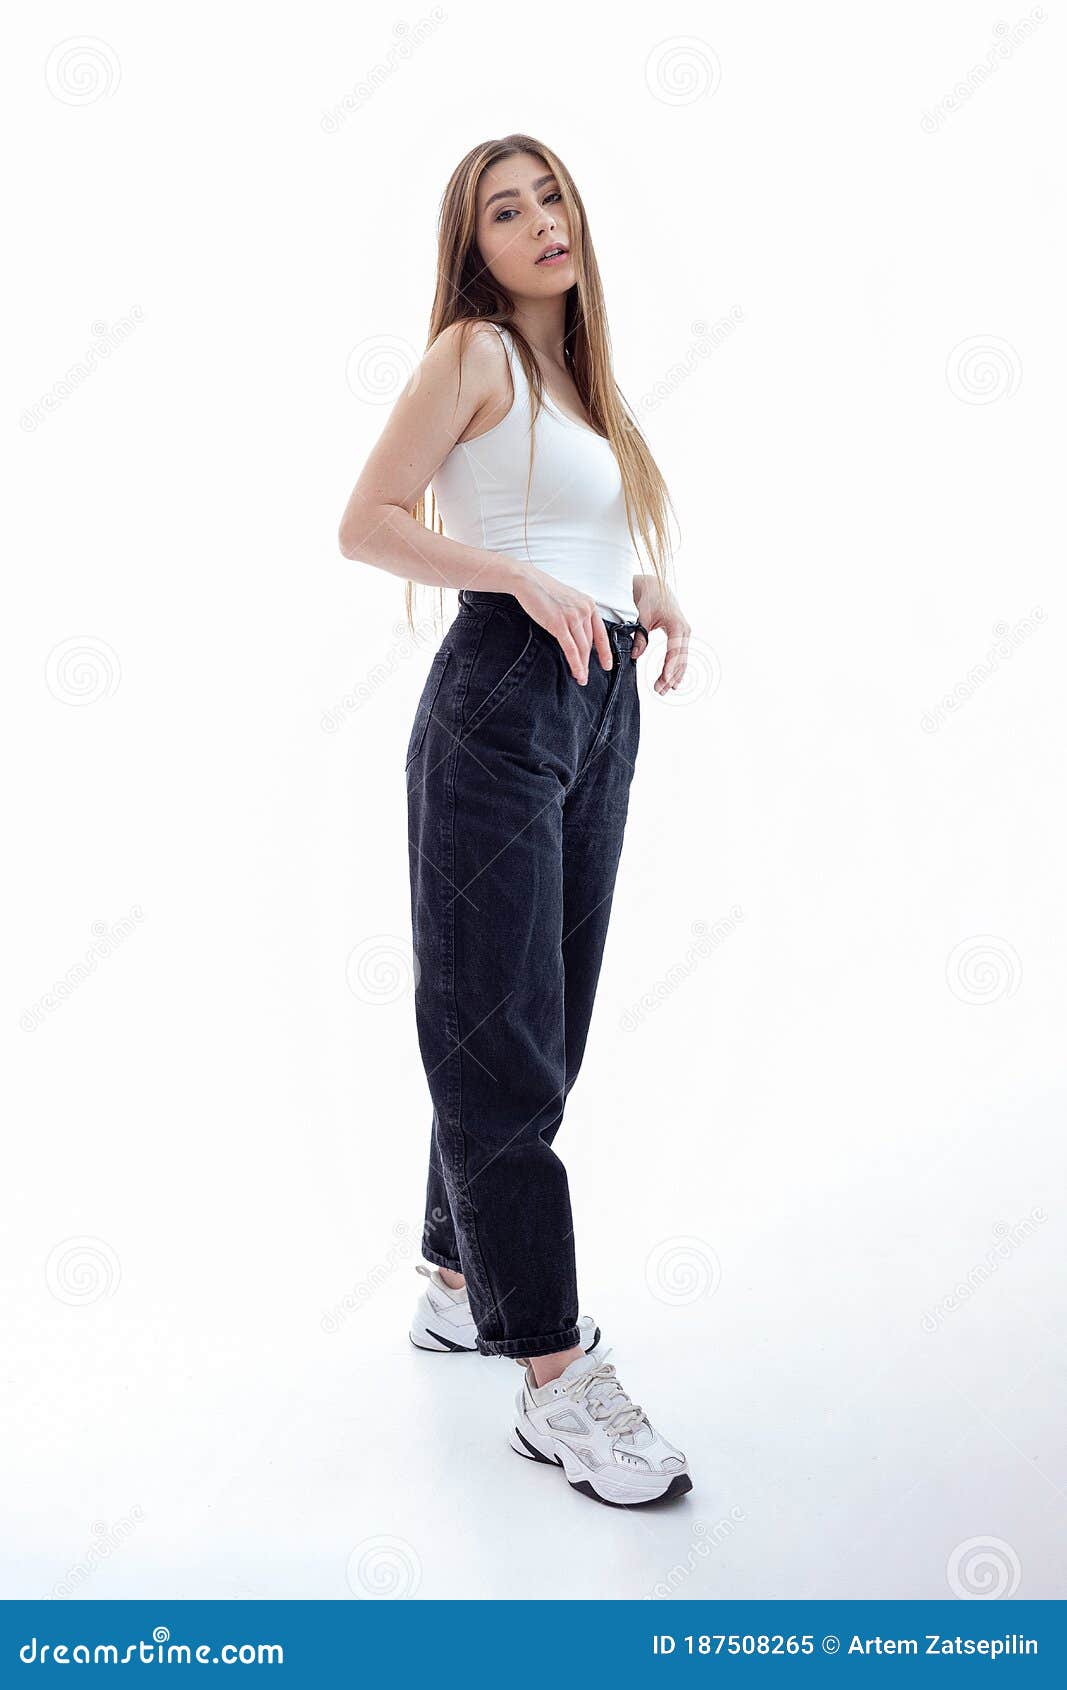 A Young Teenage Girl In A White Shirt And Black Jeans On A Black Studio  Background Stock Photo - Download Image Now - iStock